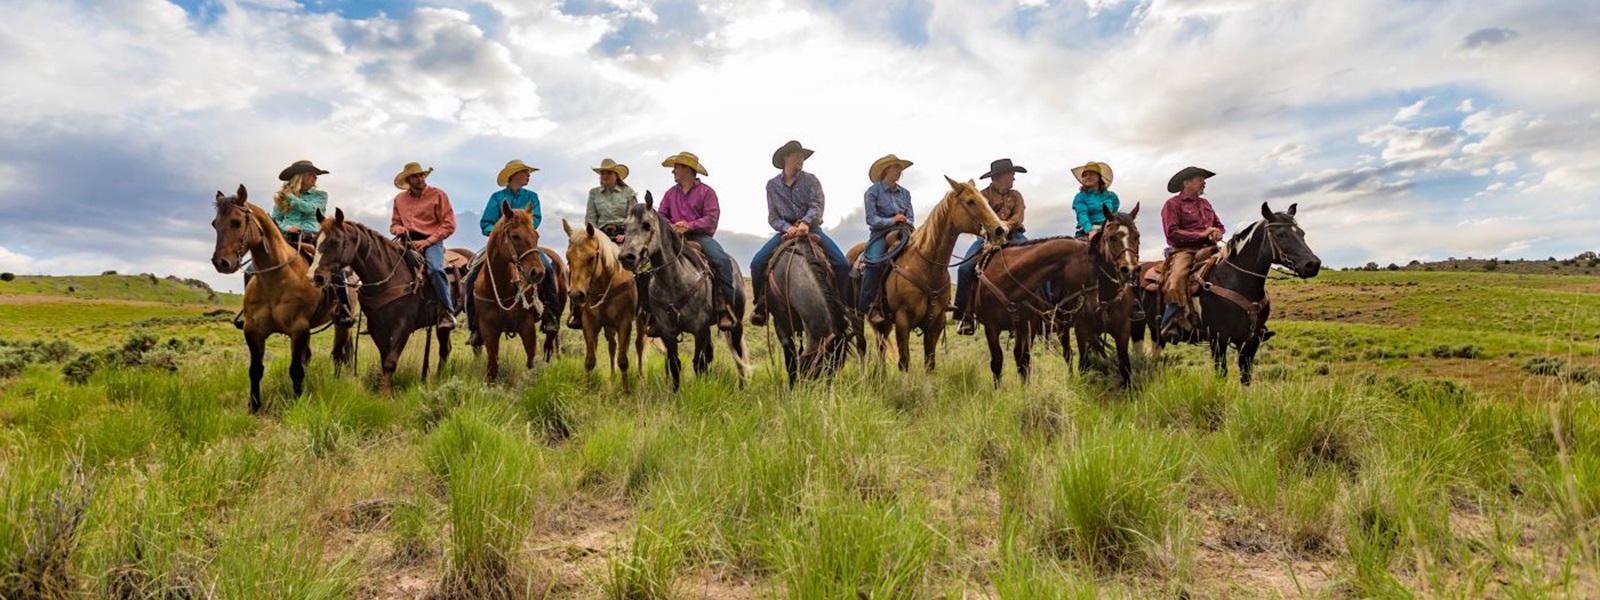 Backlit Line Up of a Group of Cowboys and Cowgirls on horseback on the prairie